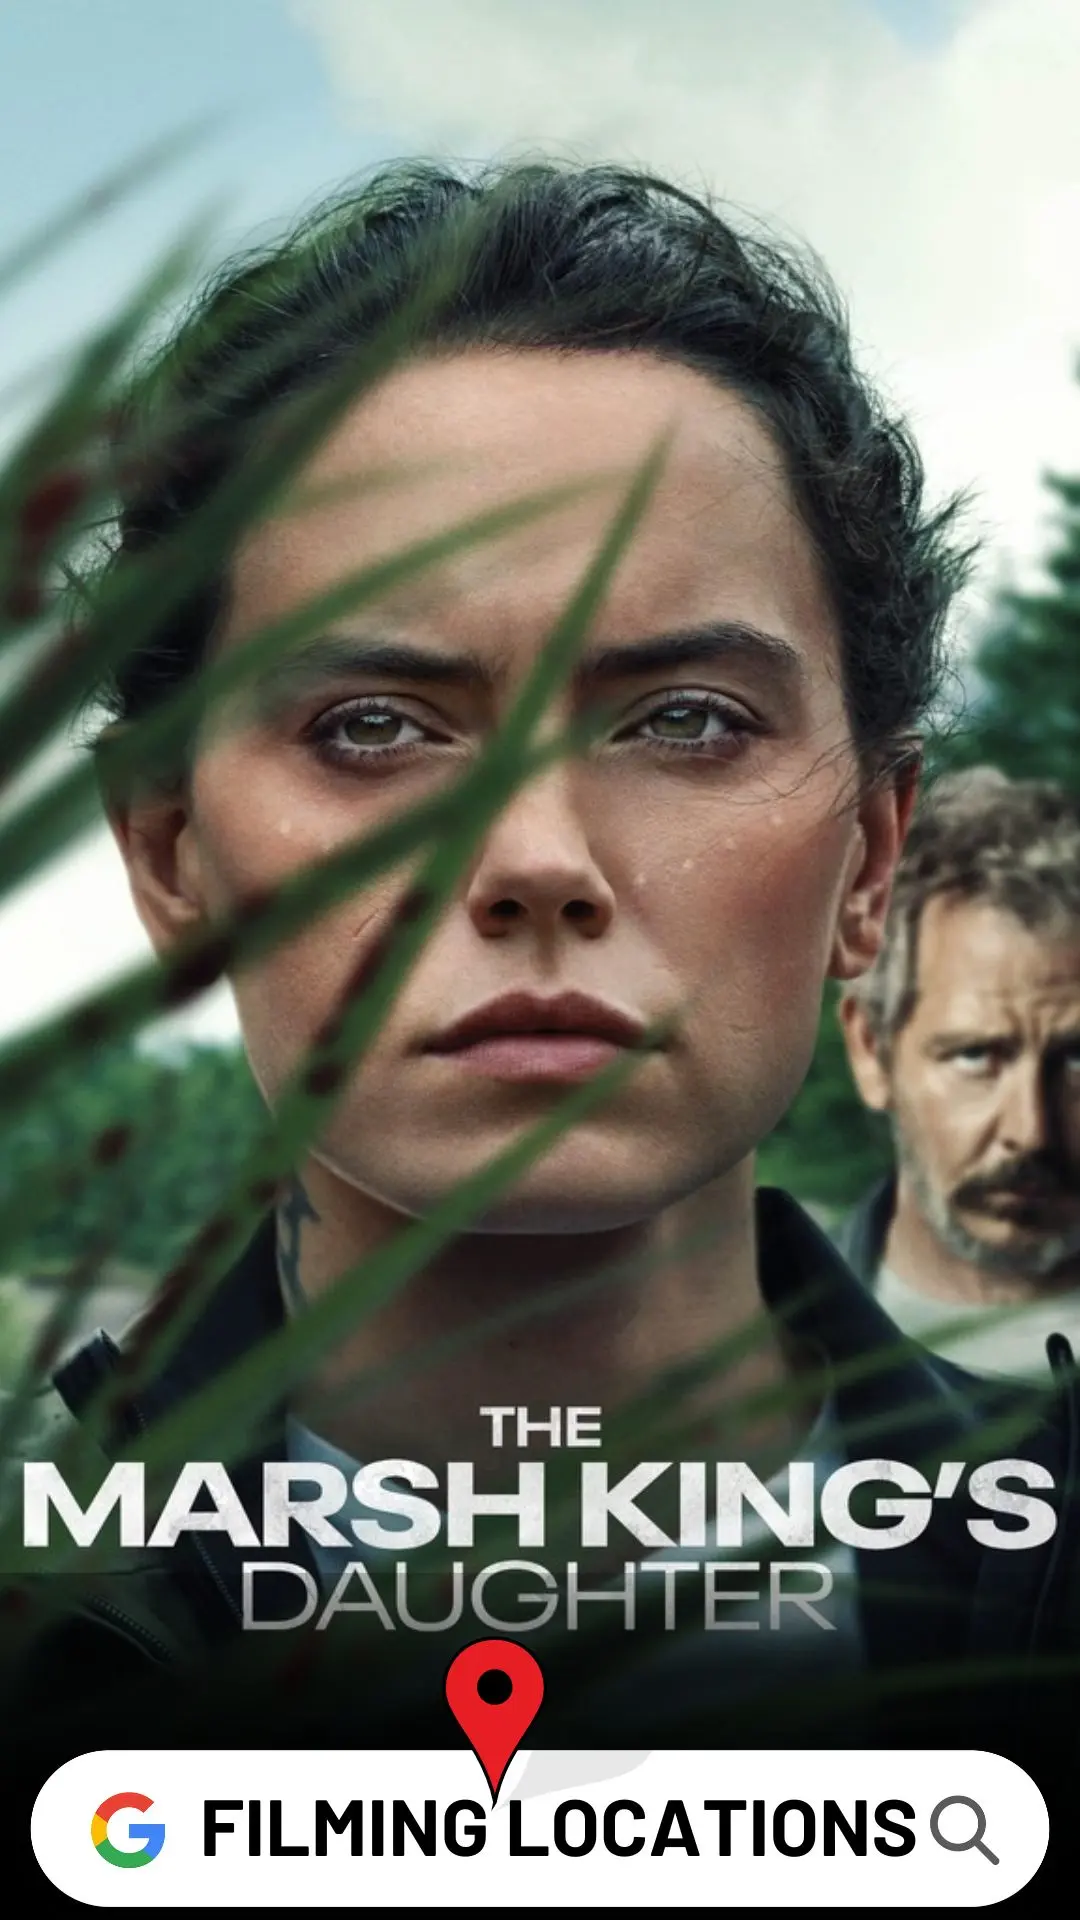 The Marsh King's Daughter Filming Locations